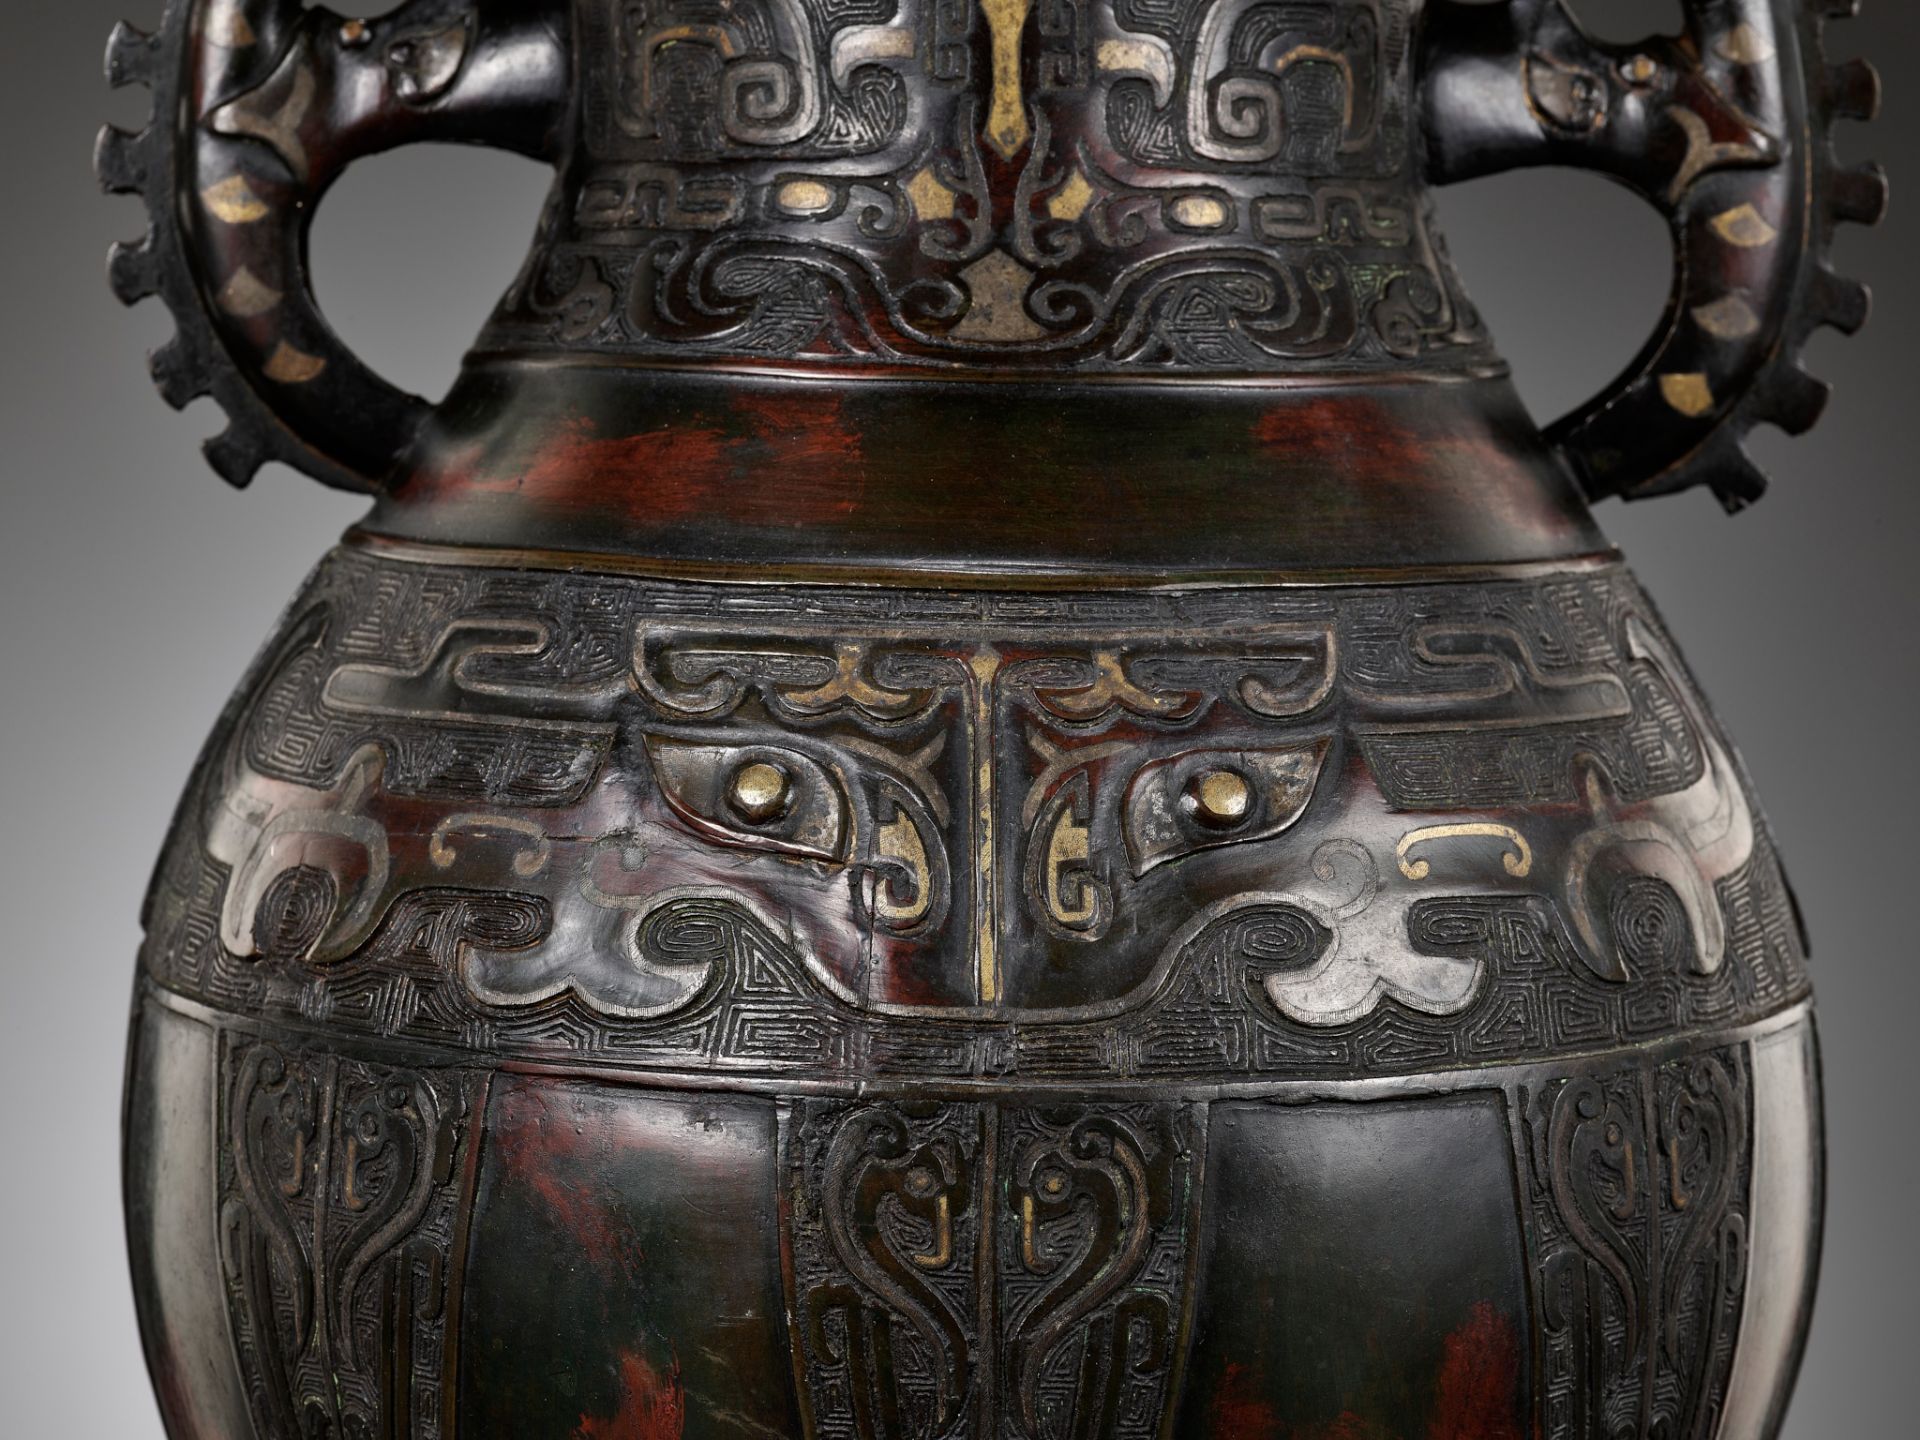 A LARGE ARCHAISTIC GOLD AND SILVER-INLAID BRONZE VASE, HU, QING DYNASTY - Bild 13 aus 14